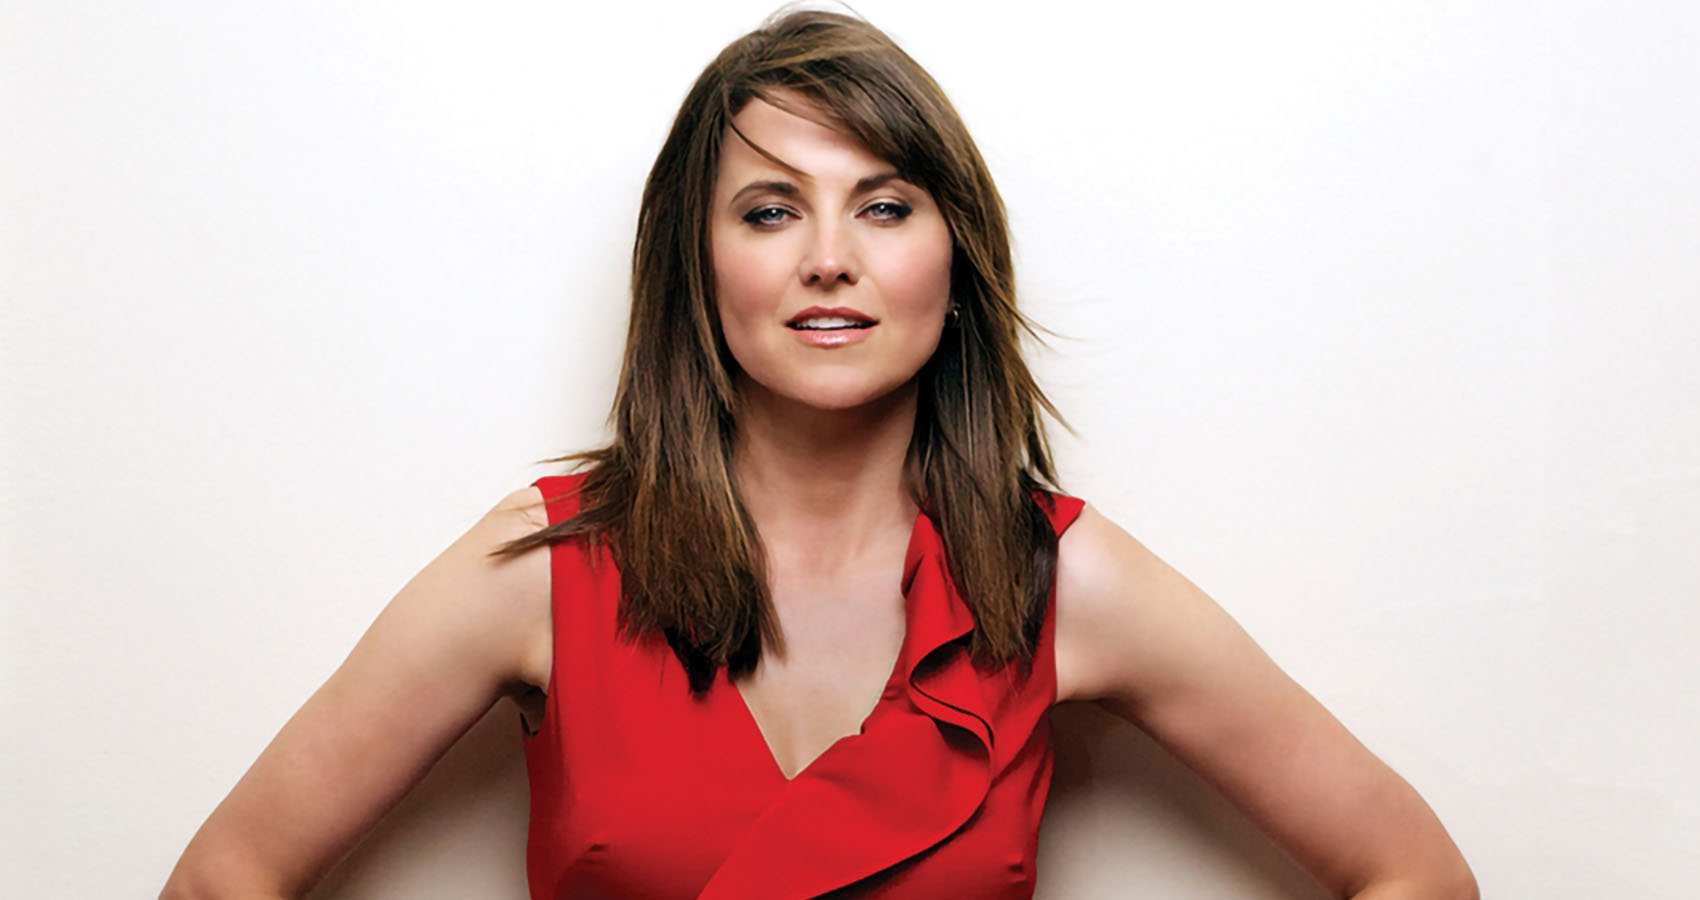 celeb names or pornstars - lucy lawless